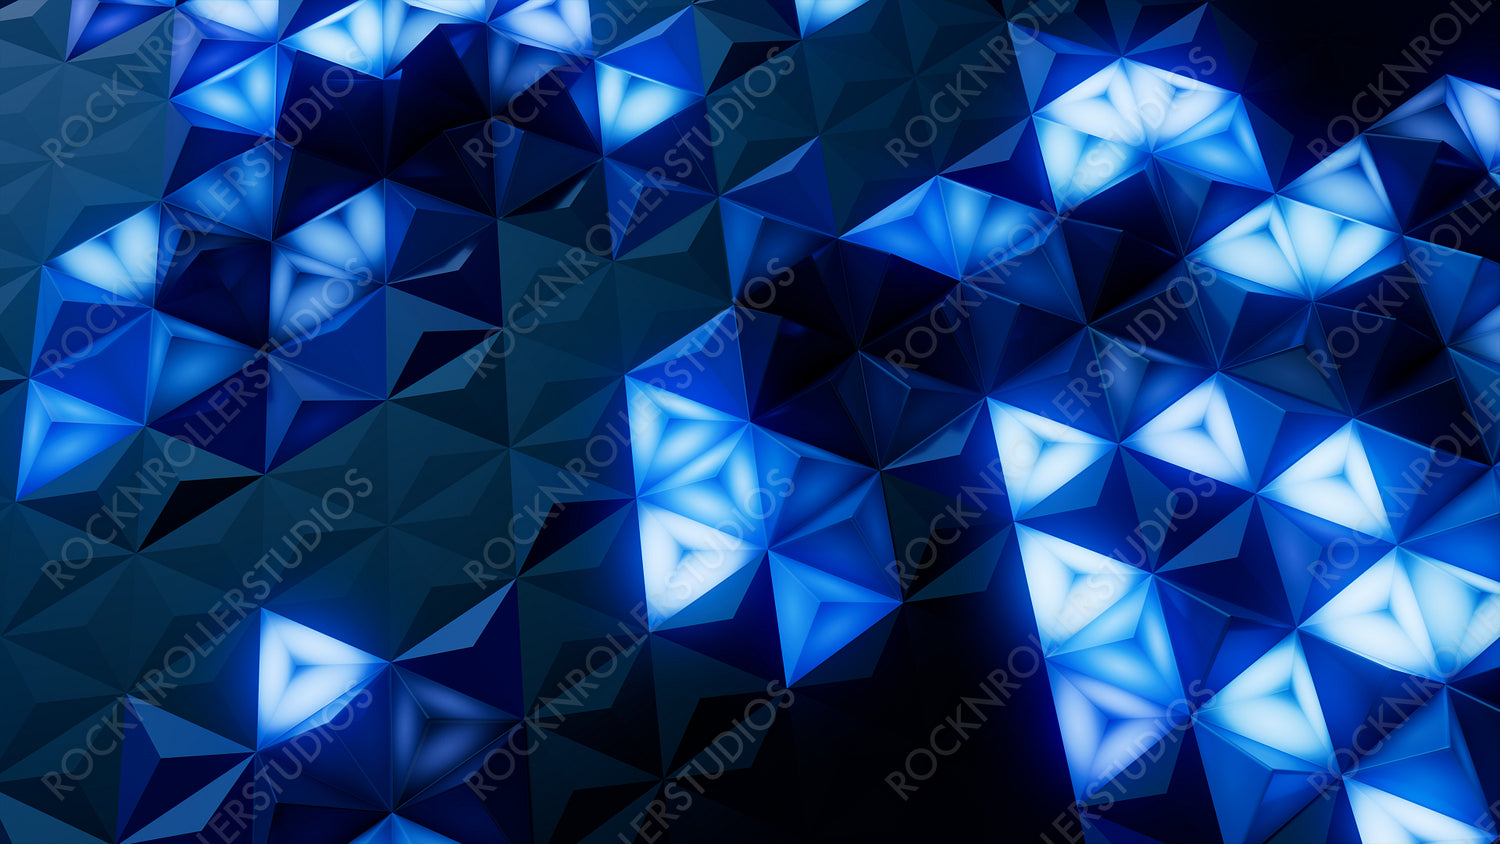 Illuminated, Blue Three-Dimensional Surface with Tetrahedrons. High Tech, Neon 3d Banner.